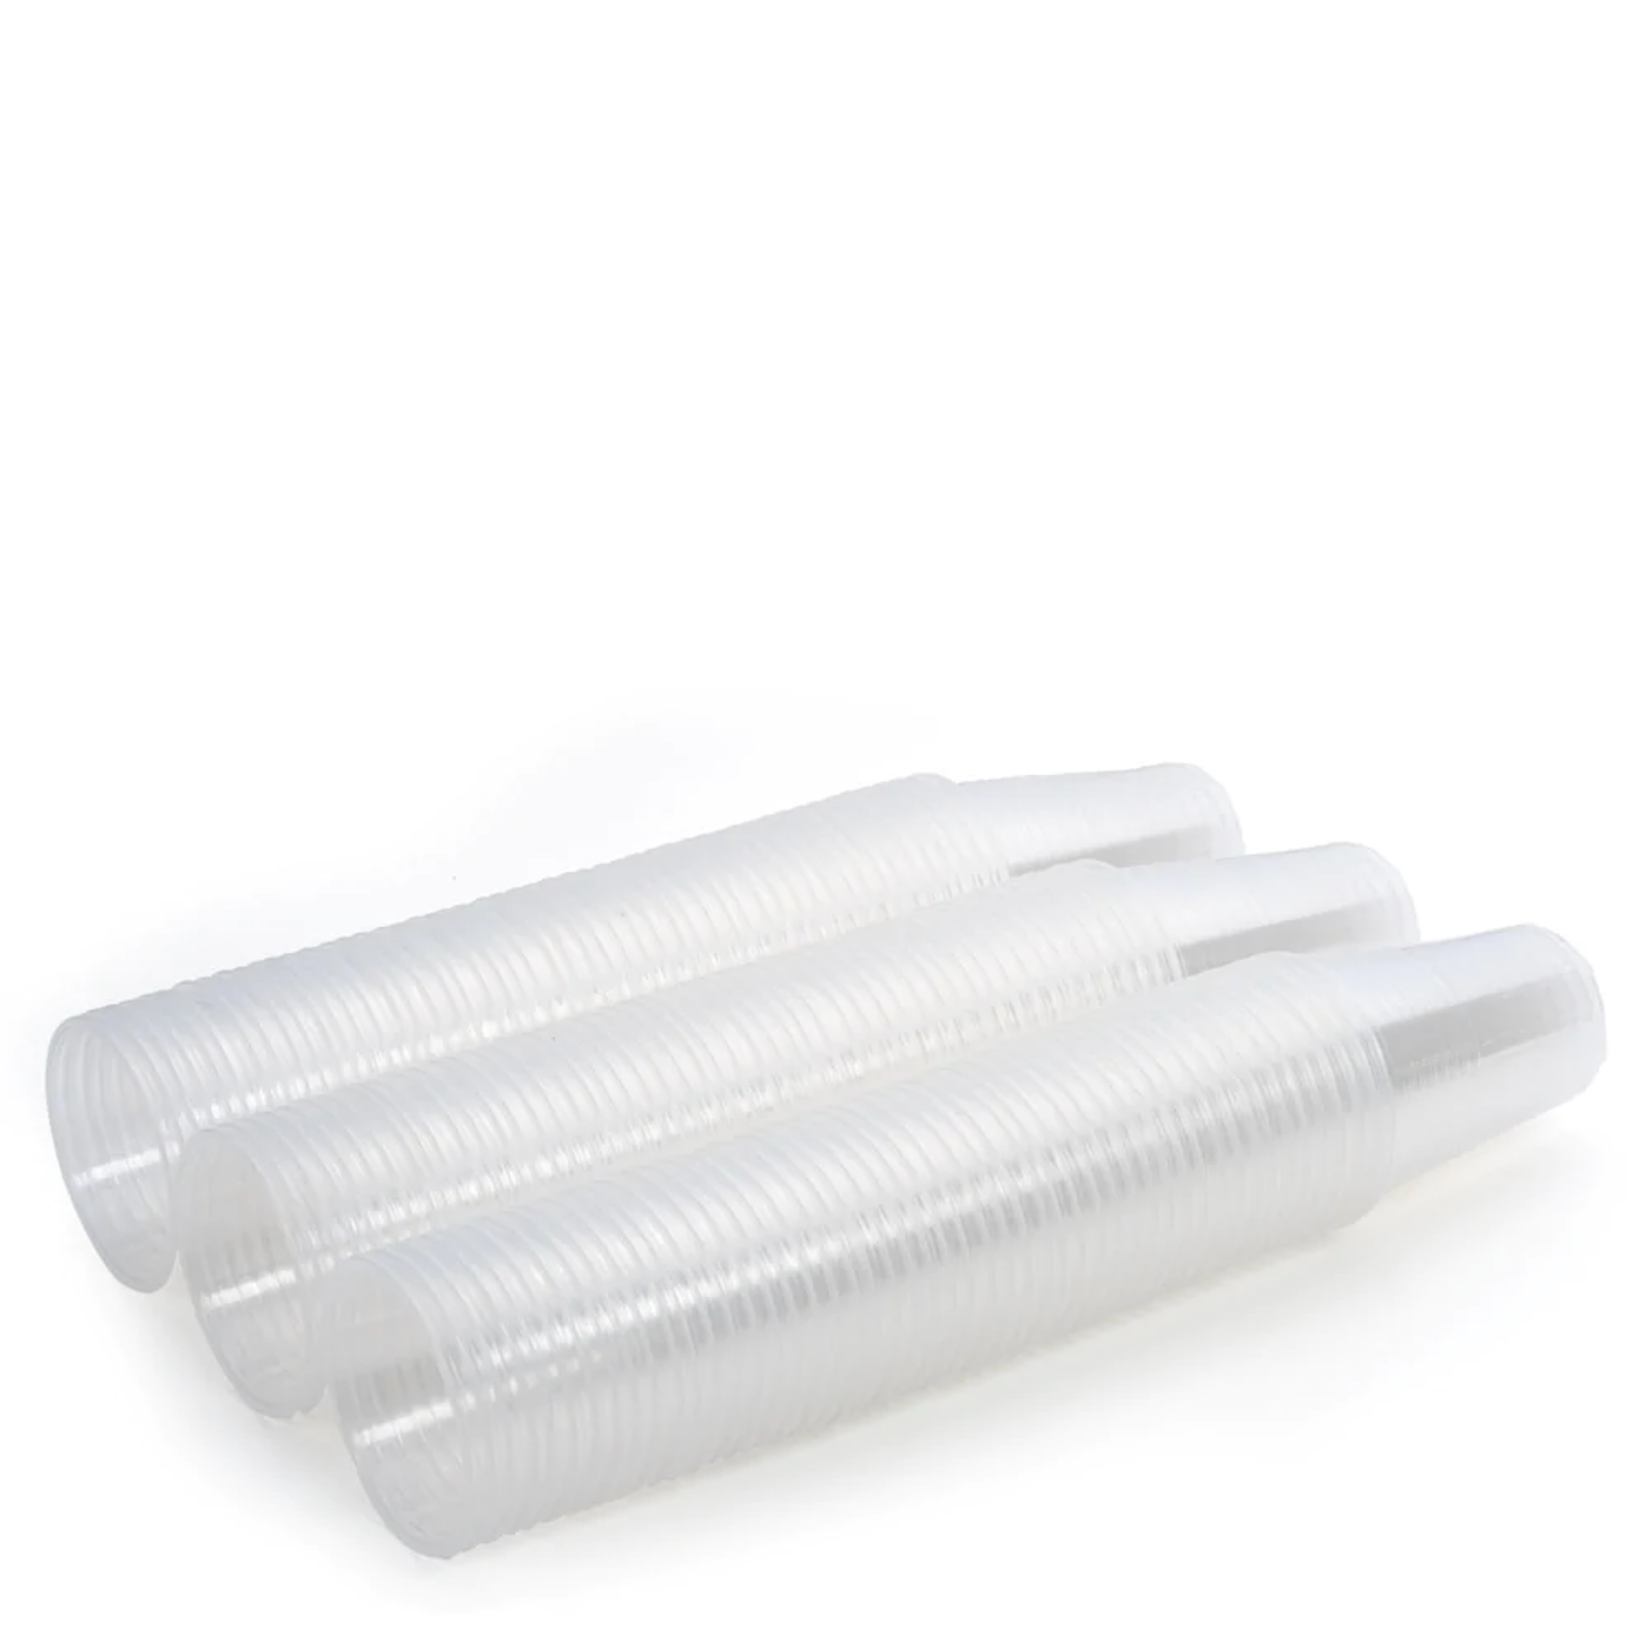 SAFERLY DISPOSABLE PLASTIC RINSE CUPS 5OZ